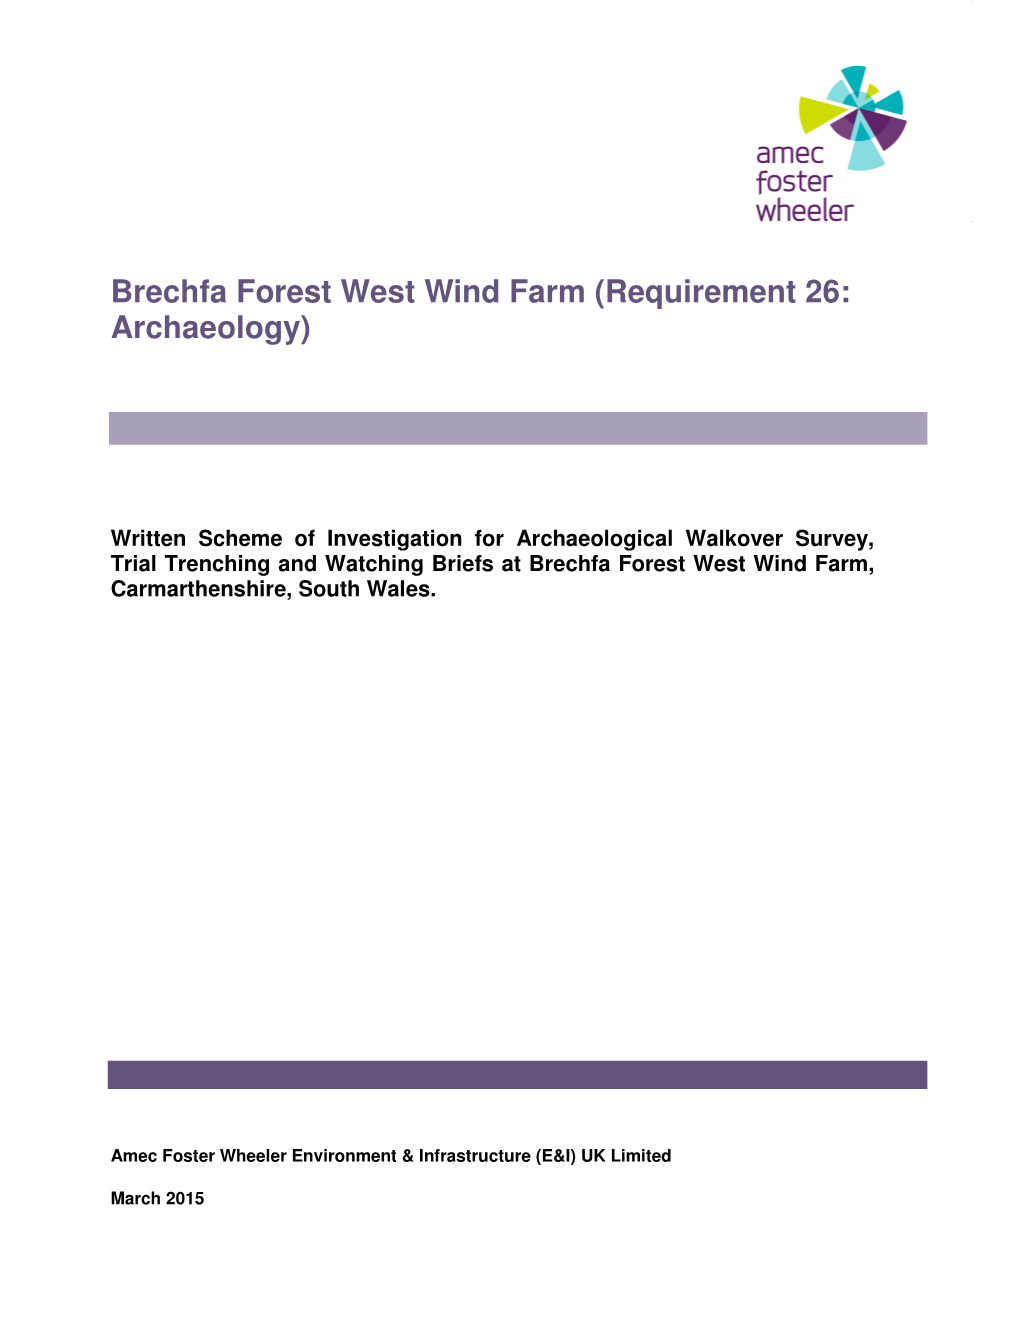 Brechfa Forest West Wind Farm (Requirement 26: Archaeology)